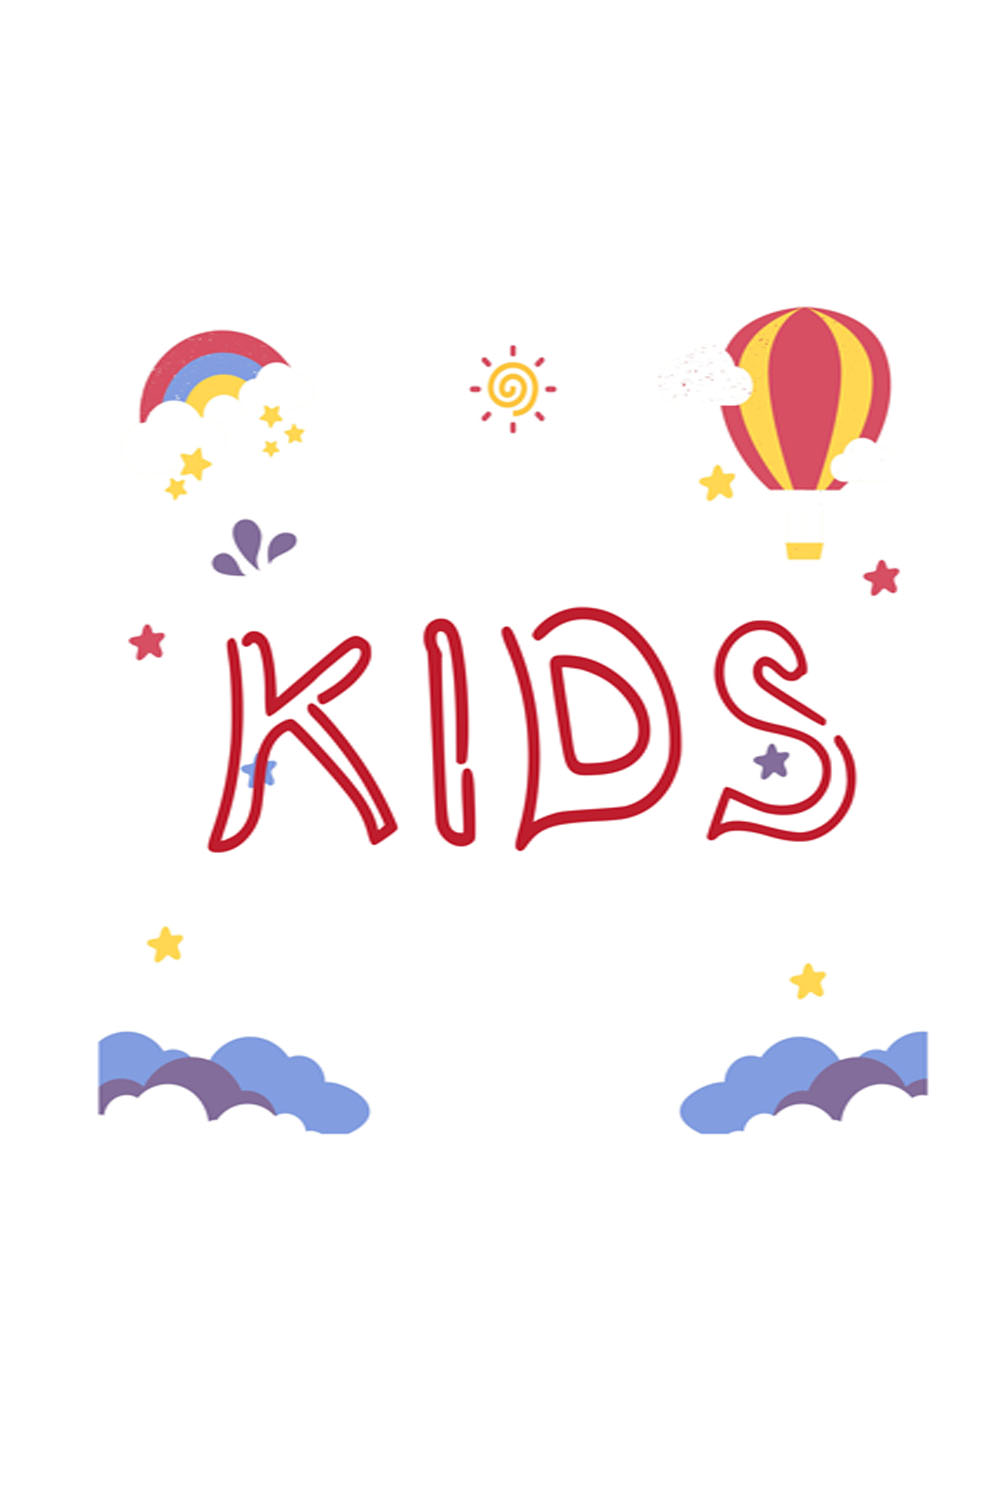 kids funy font with cute and cheerful shapes pinterest preview image.